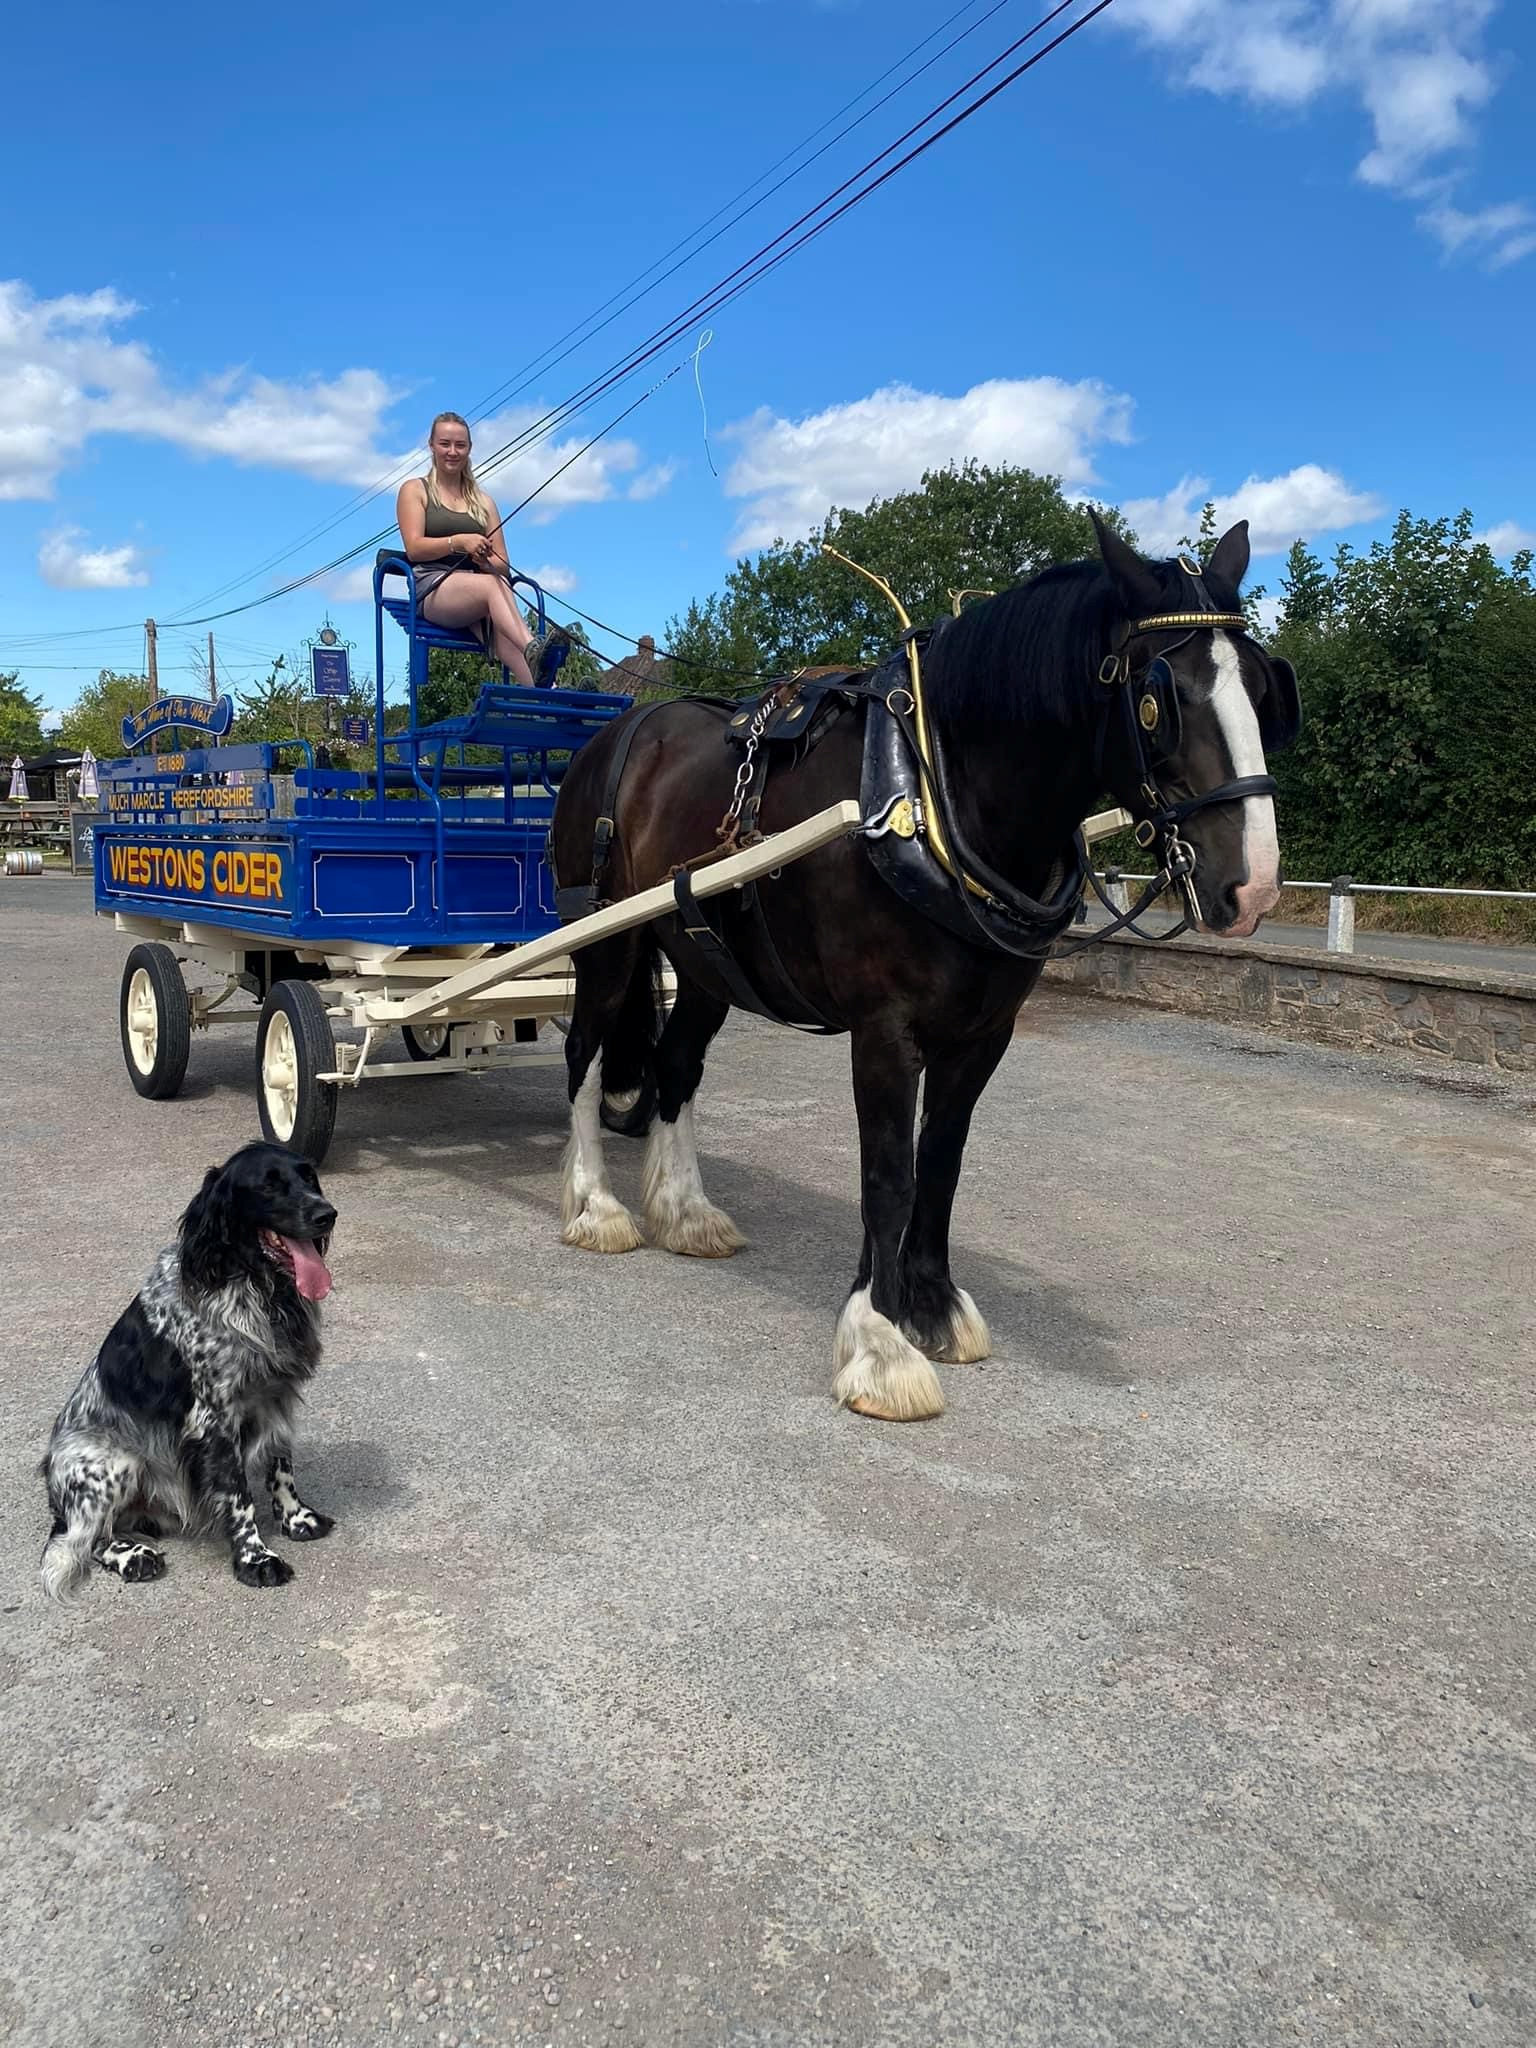 The Tavern in Much Marcle, Herefordshire, has introduced a fuel free delivery service by using a horse and cart for its weekly cider order from Westons Cider